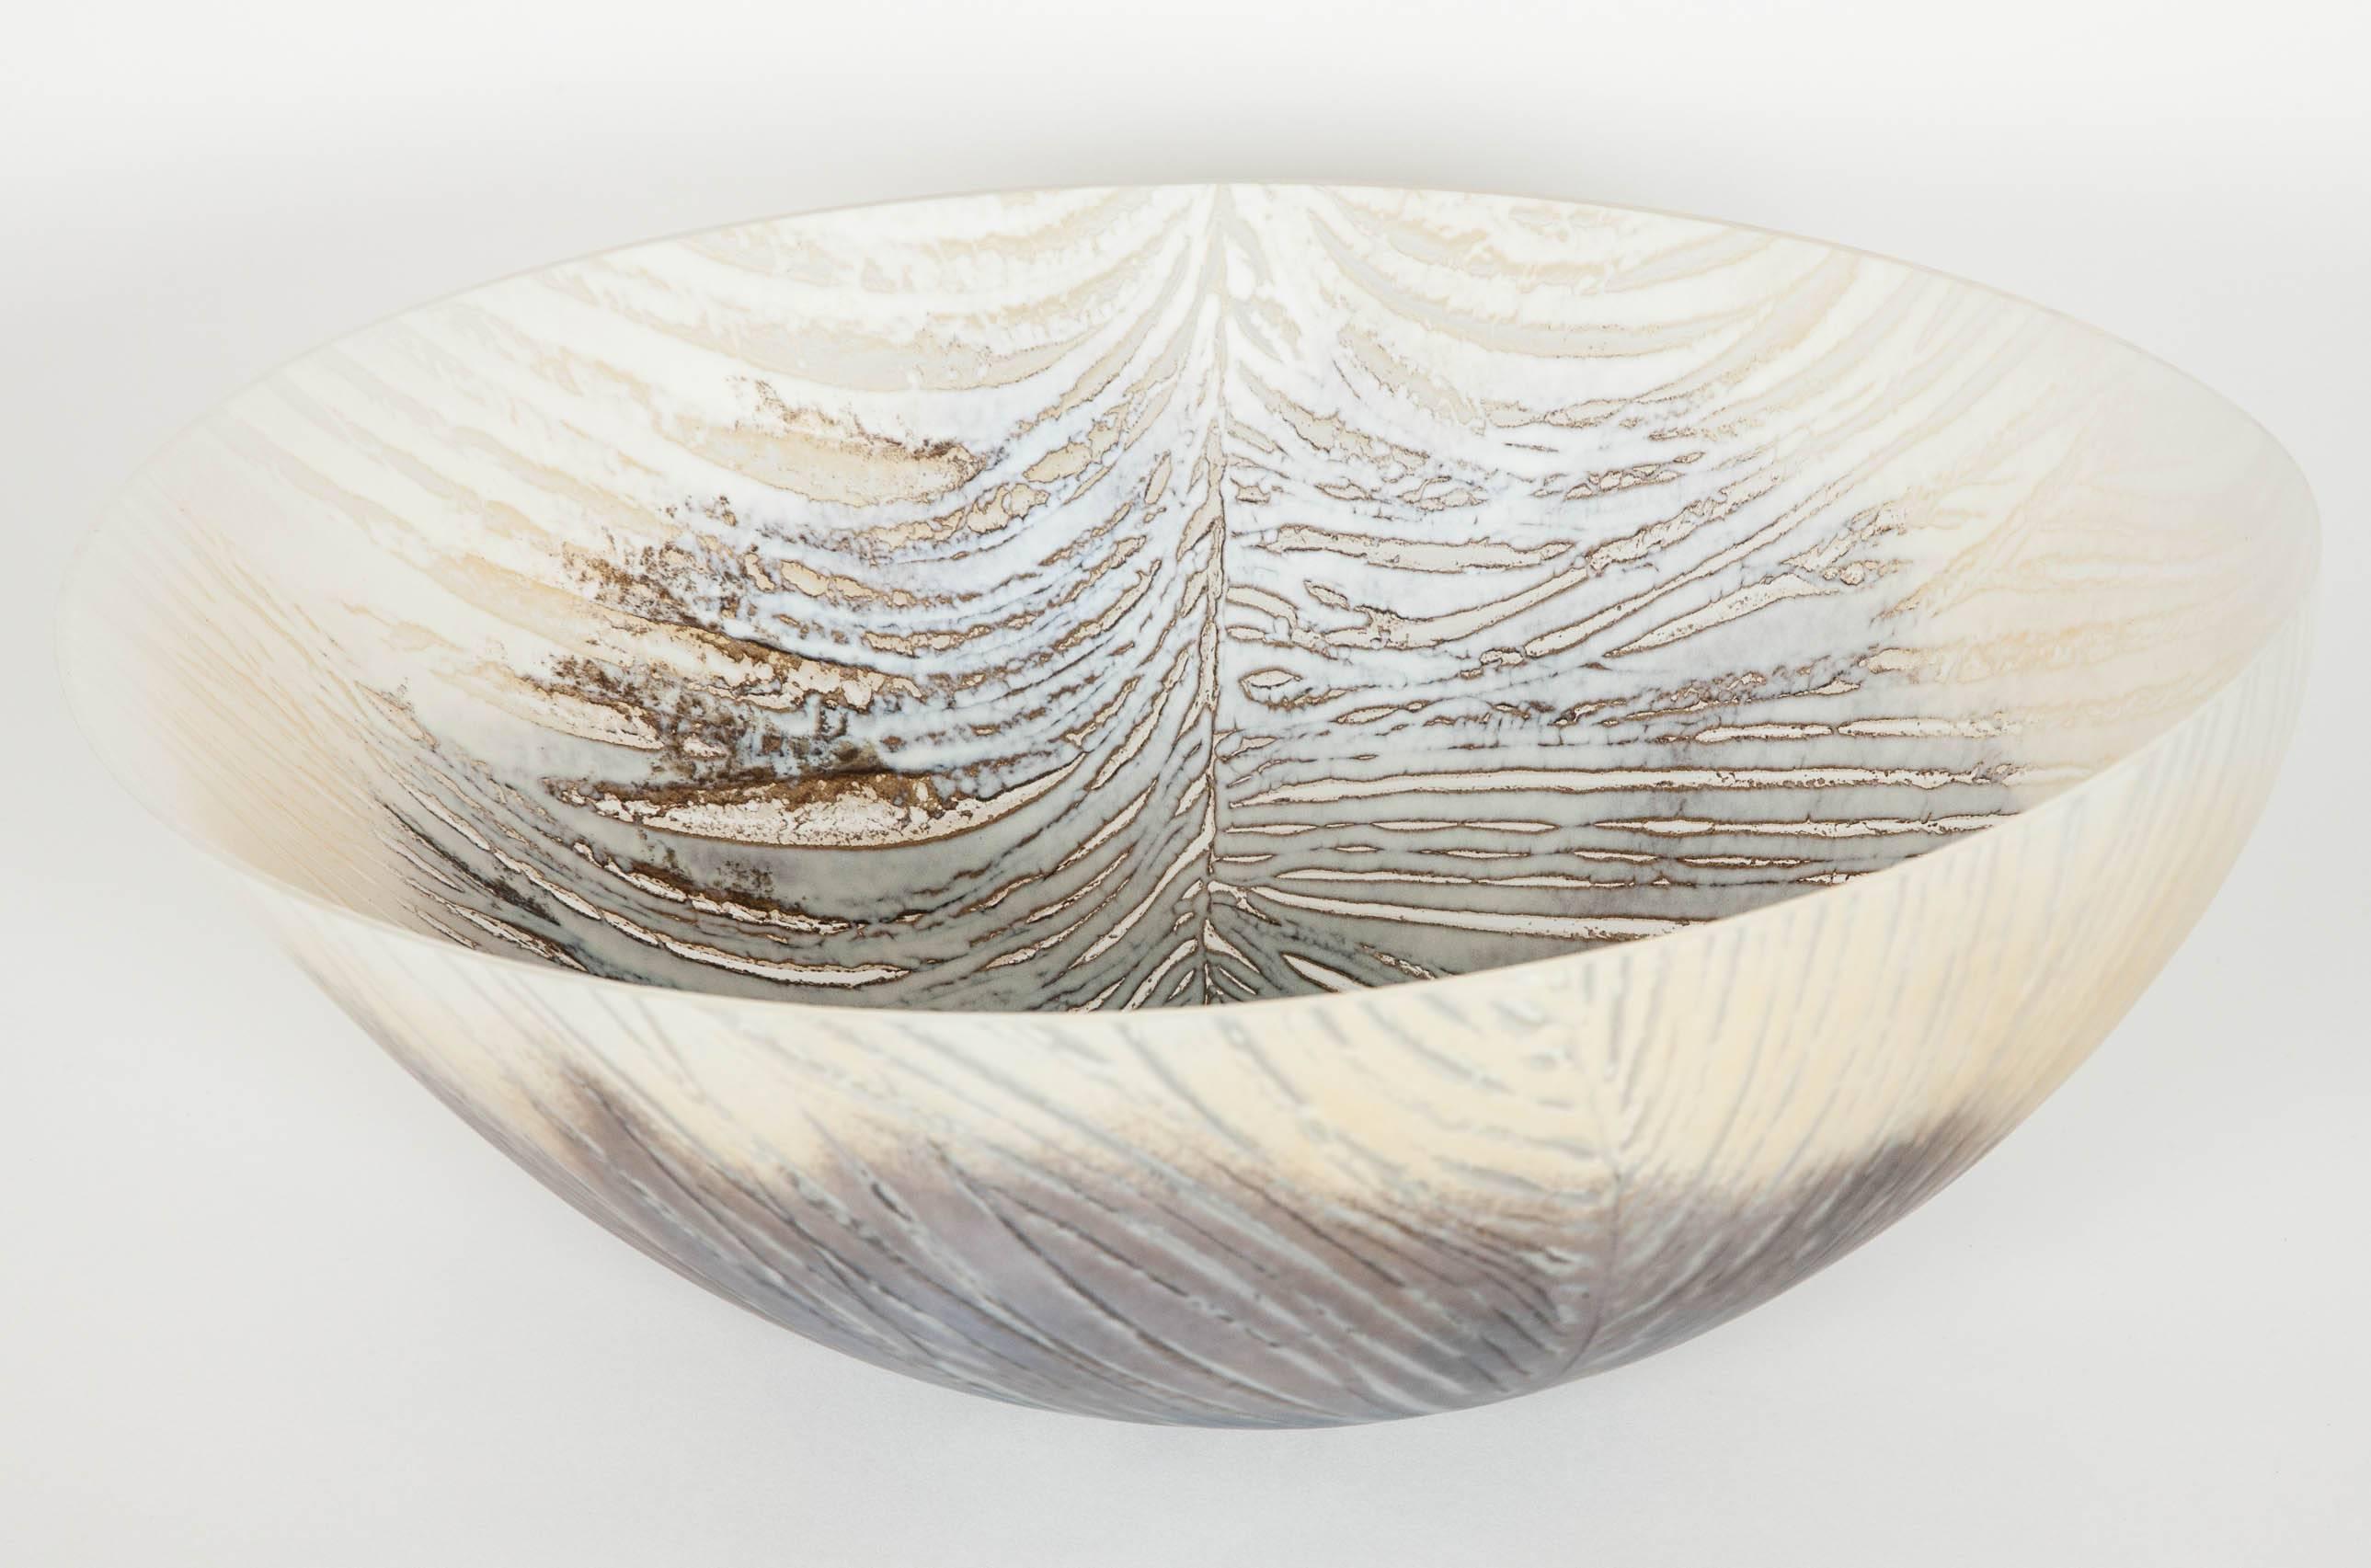 Organic Modern Feather, a Unique Glass Bowl in natural tones & colours by Amanda Simmons